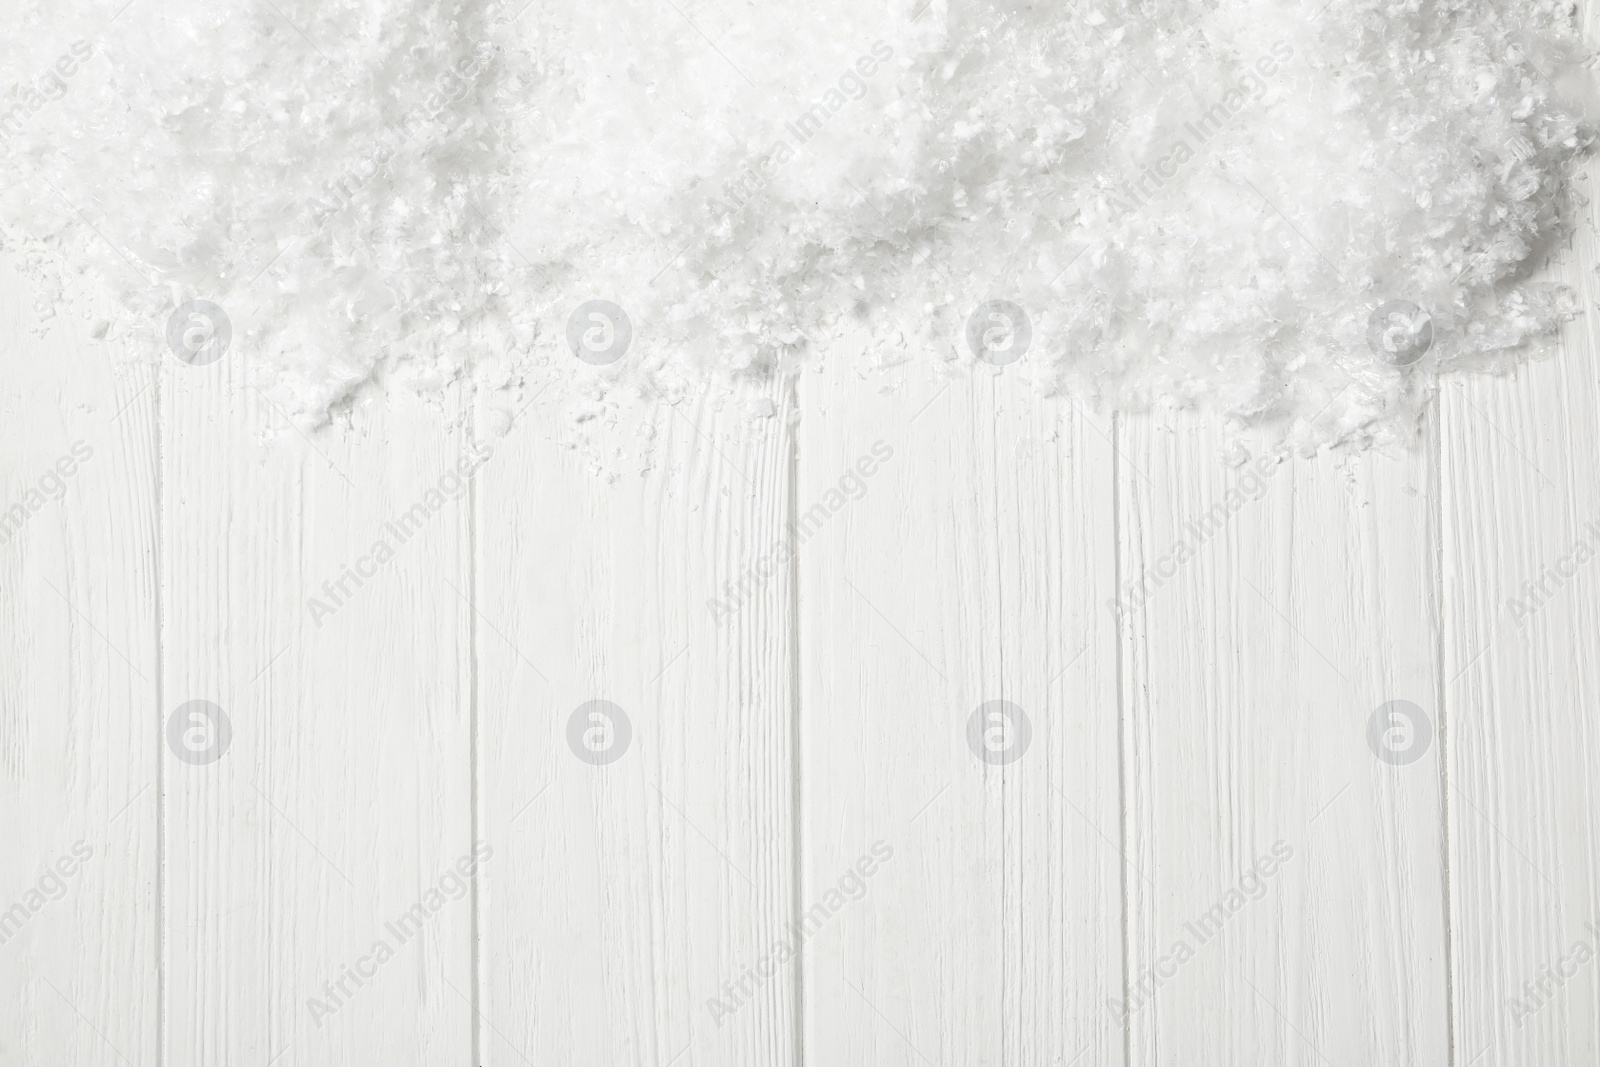 Photo of Snow and space for text on white wooden background, top view. Christmas season